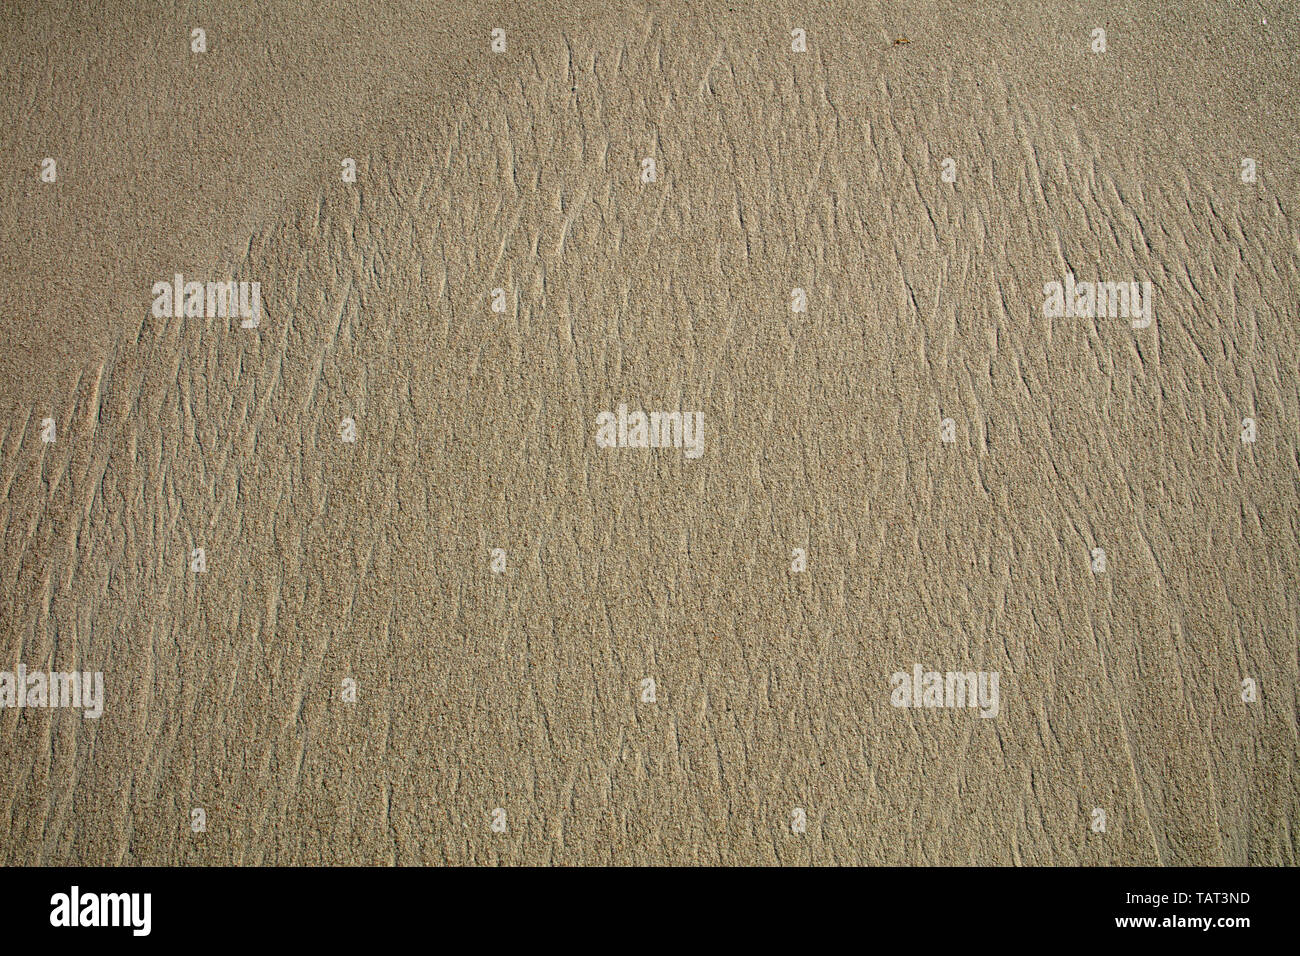 Patterns left by the tidal waves on the beach near the shoreline. Stock Photo